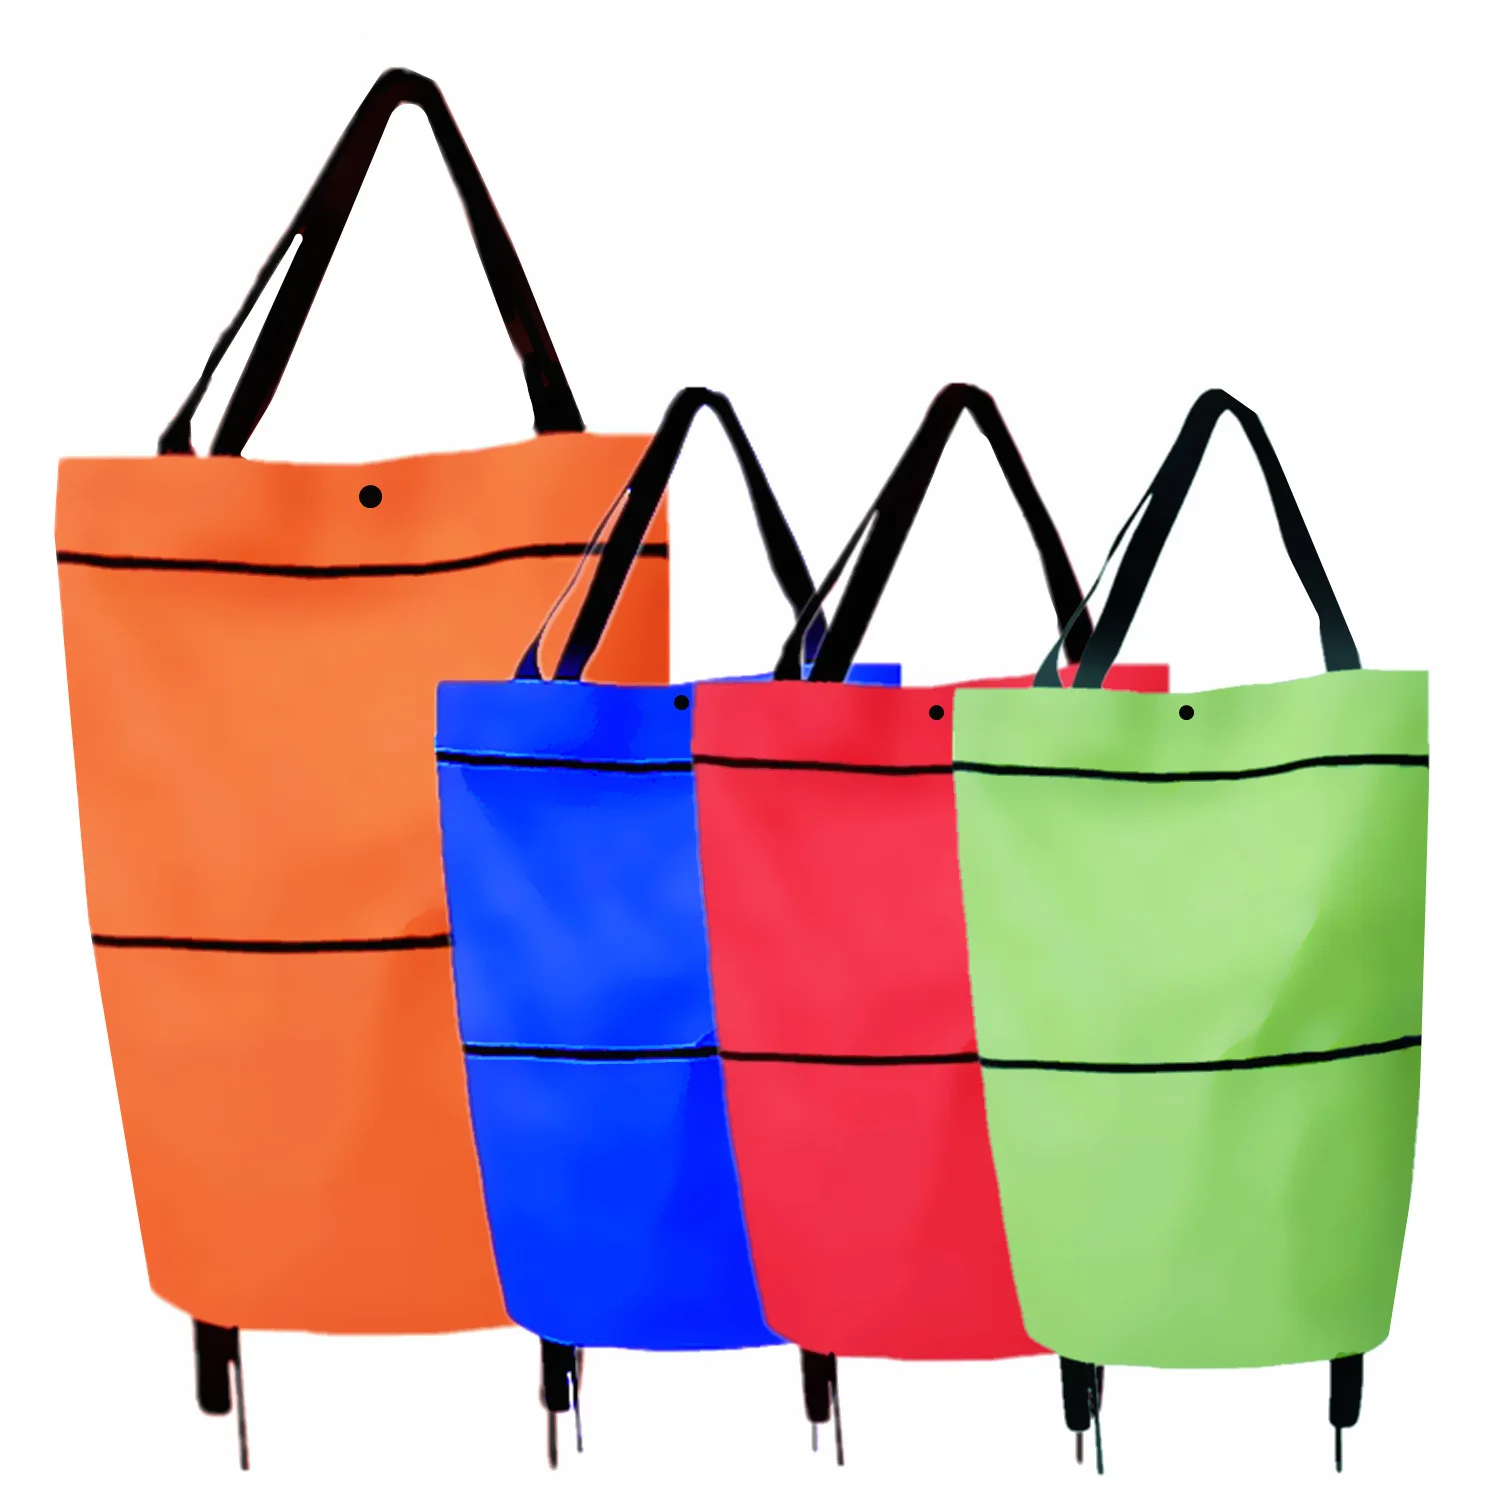 

Foldable Waterproof Bag Shopping Trolley Cart Foldable Reusable Eco Large Luggage With Wheels Basket Market Oxford Storage Bag, 9 styles